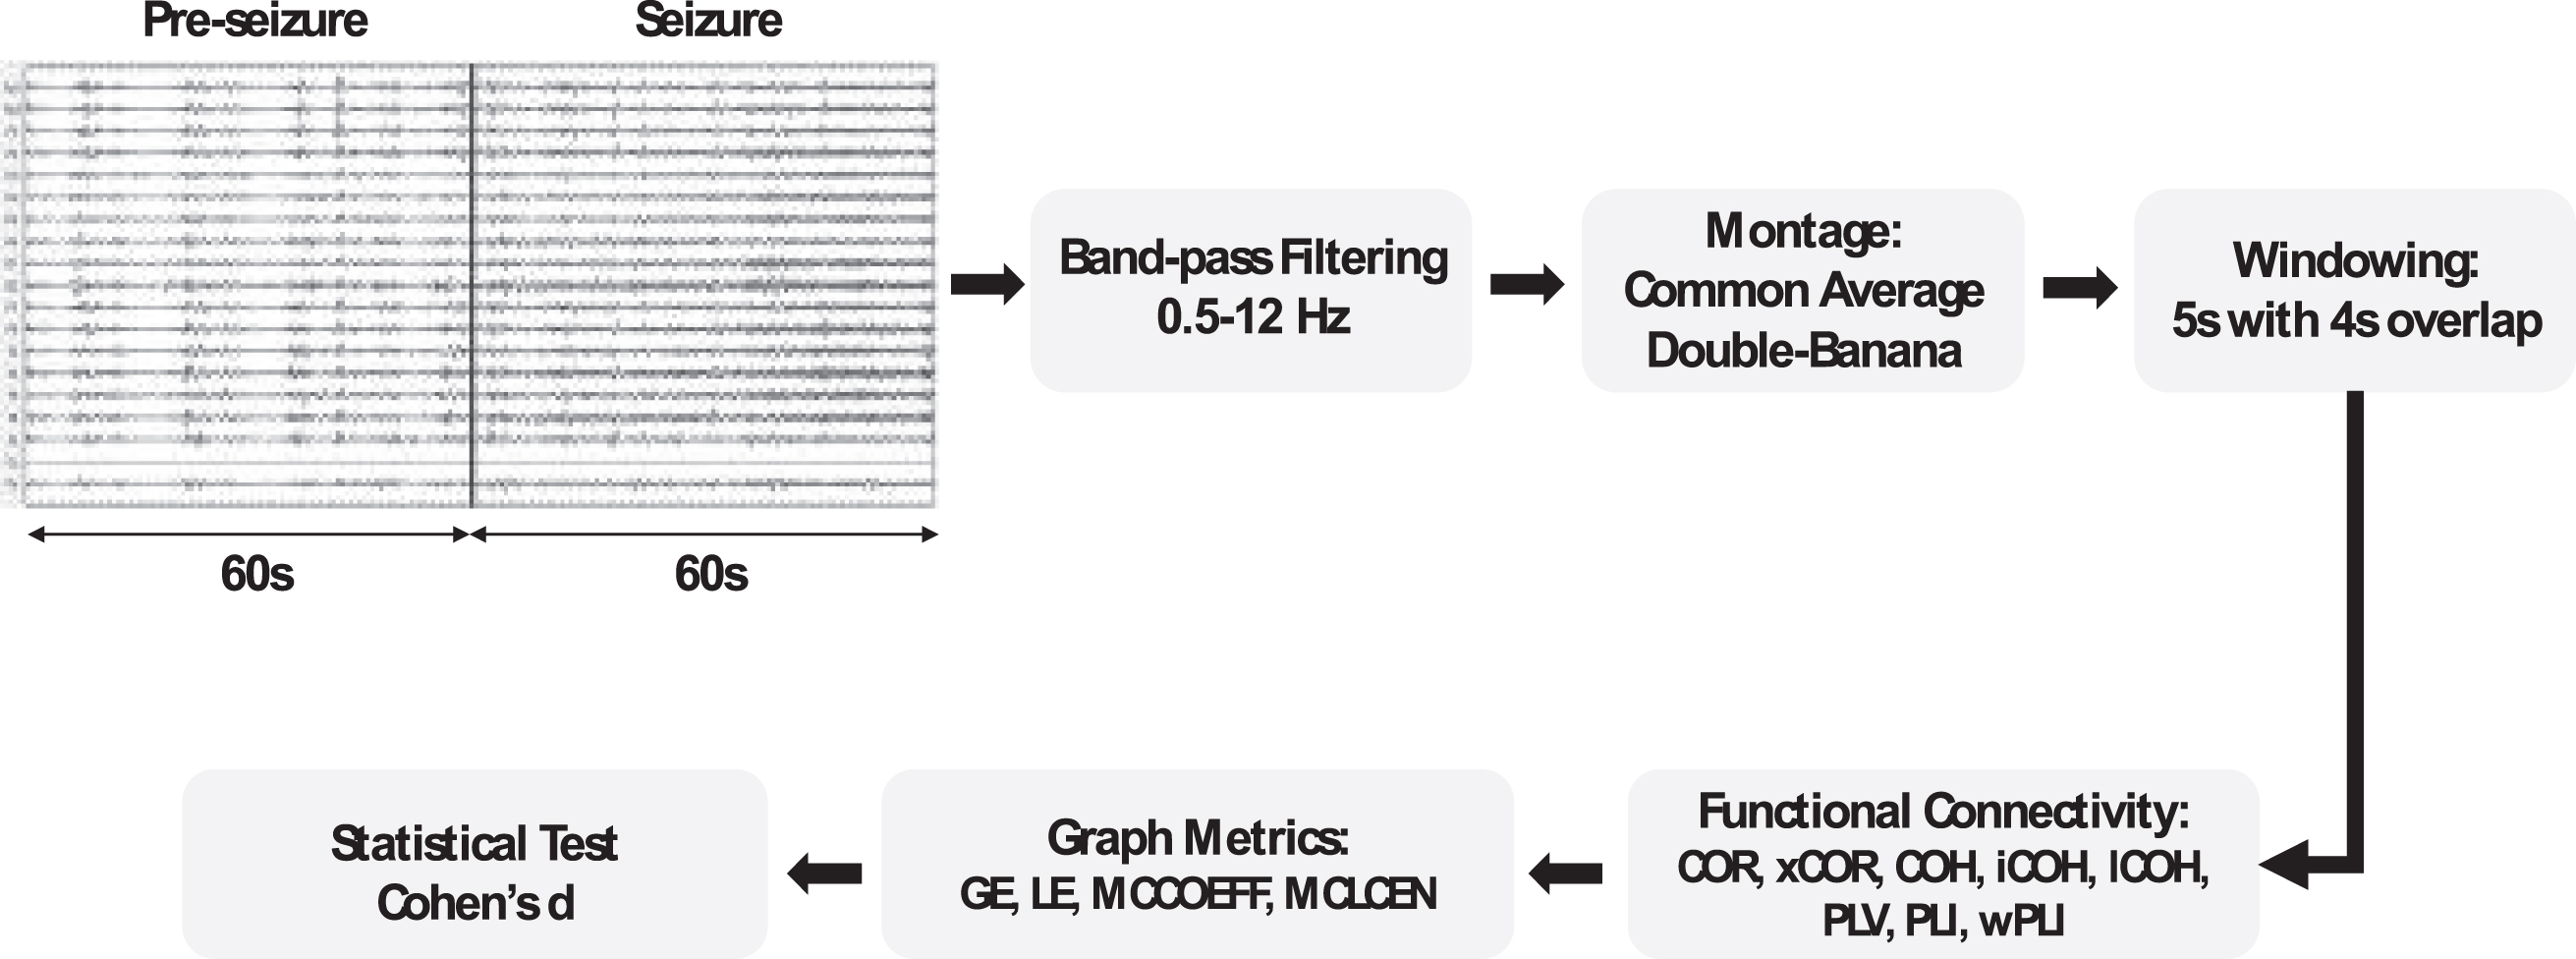 The pipeline of the analysis of functional connectivity matrices using graph metrics )for pre-seizure and seizure parts of the EEG segments. COR: correlation; xCOR: cross-correlation; COH: coherence; iCOH: imaginary part of coherence; lCOH: lagged coherence; PLV: phase-locking value; PLI: phase-lag index; wPLI: weighted phase-lag index; GE: global efficiency; LE: local efficiency; MCCOEFF: mean clustering coefficient; MCLCEN: and mean closeness centrality.